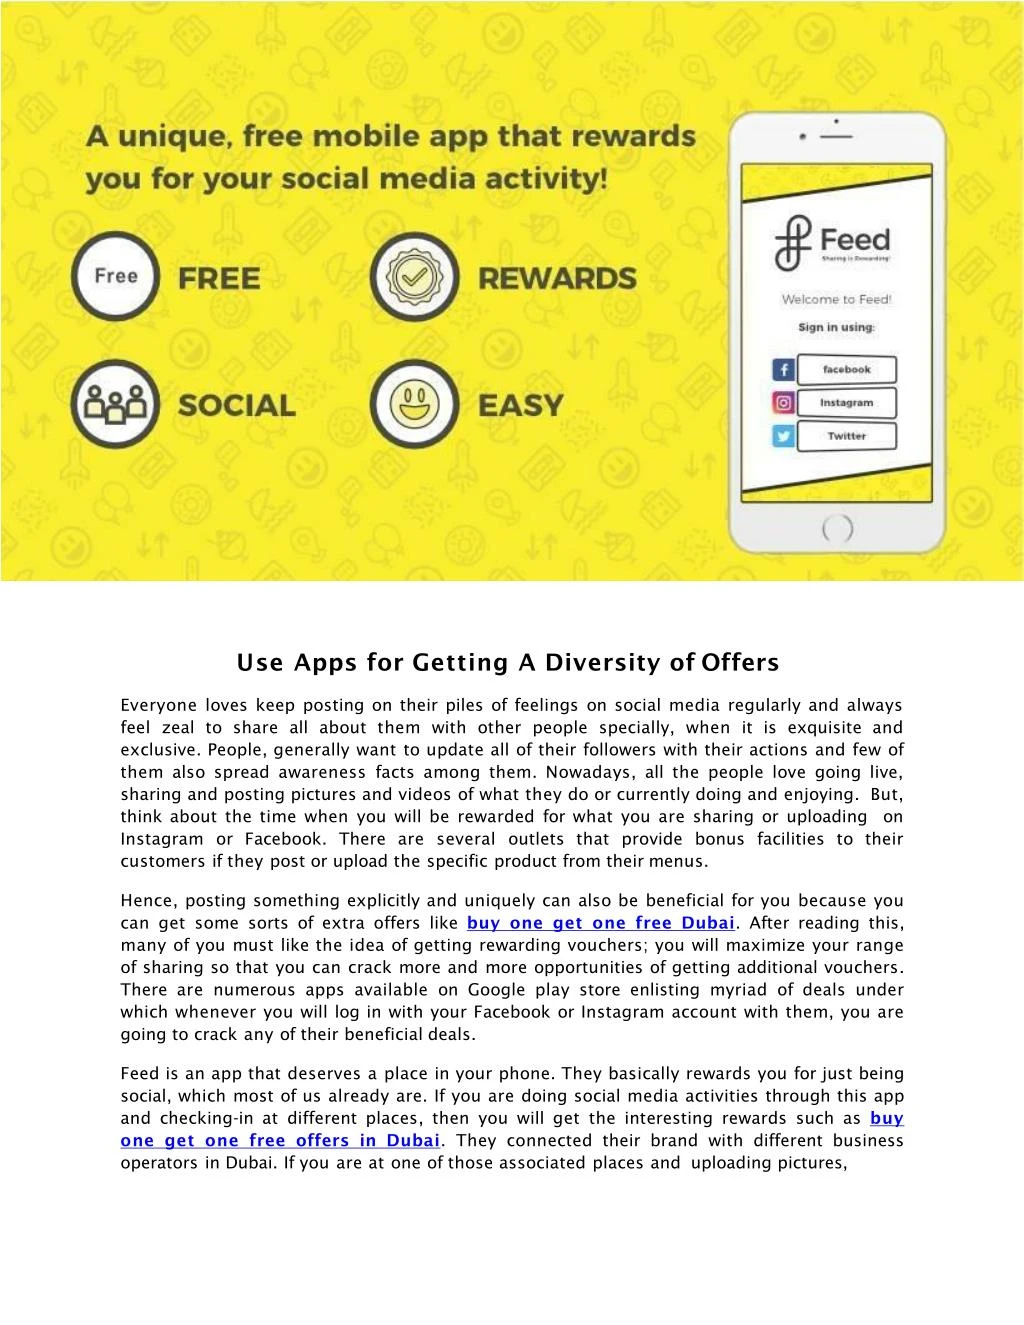 use apps for getting a diversity of offers